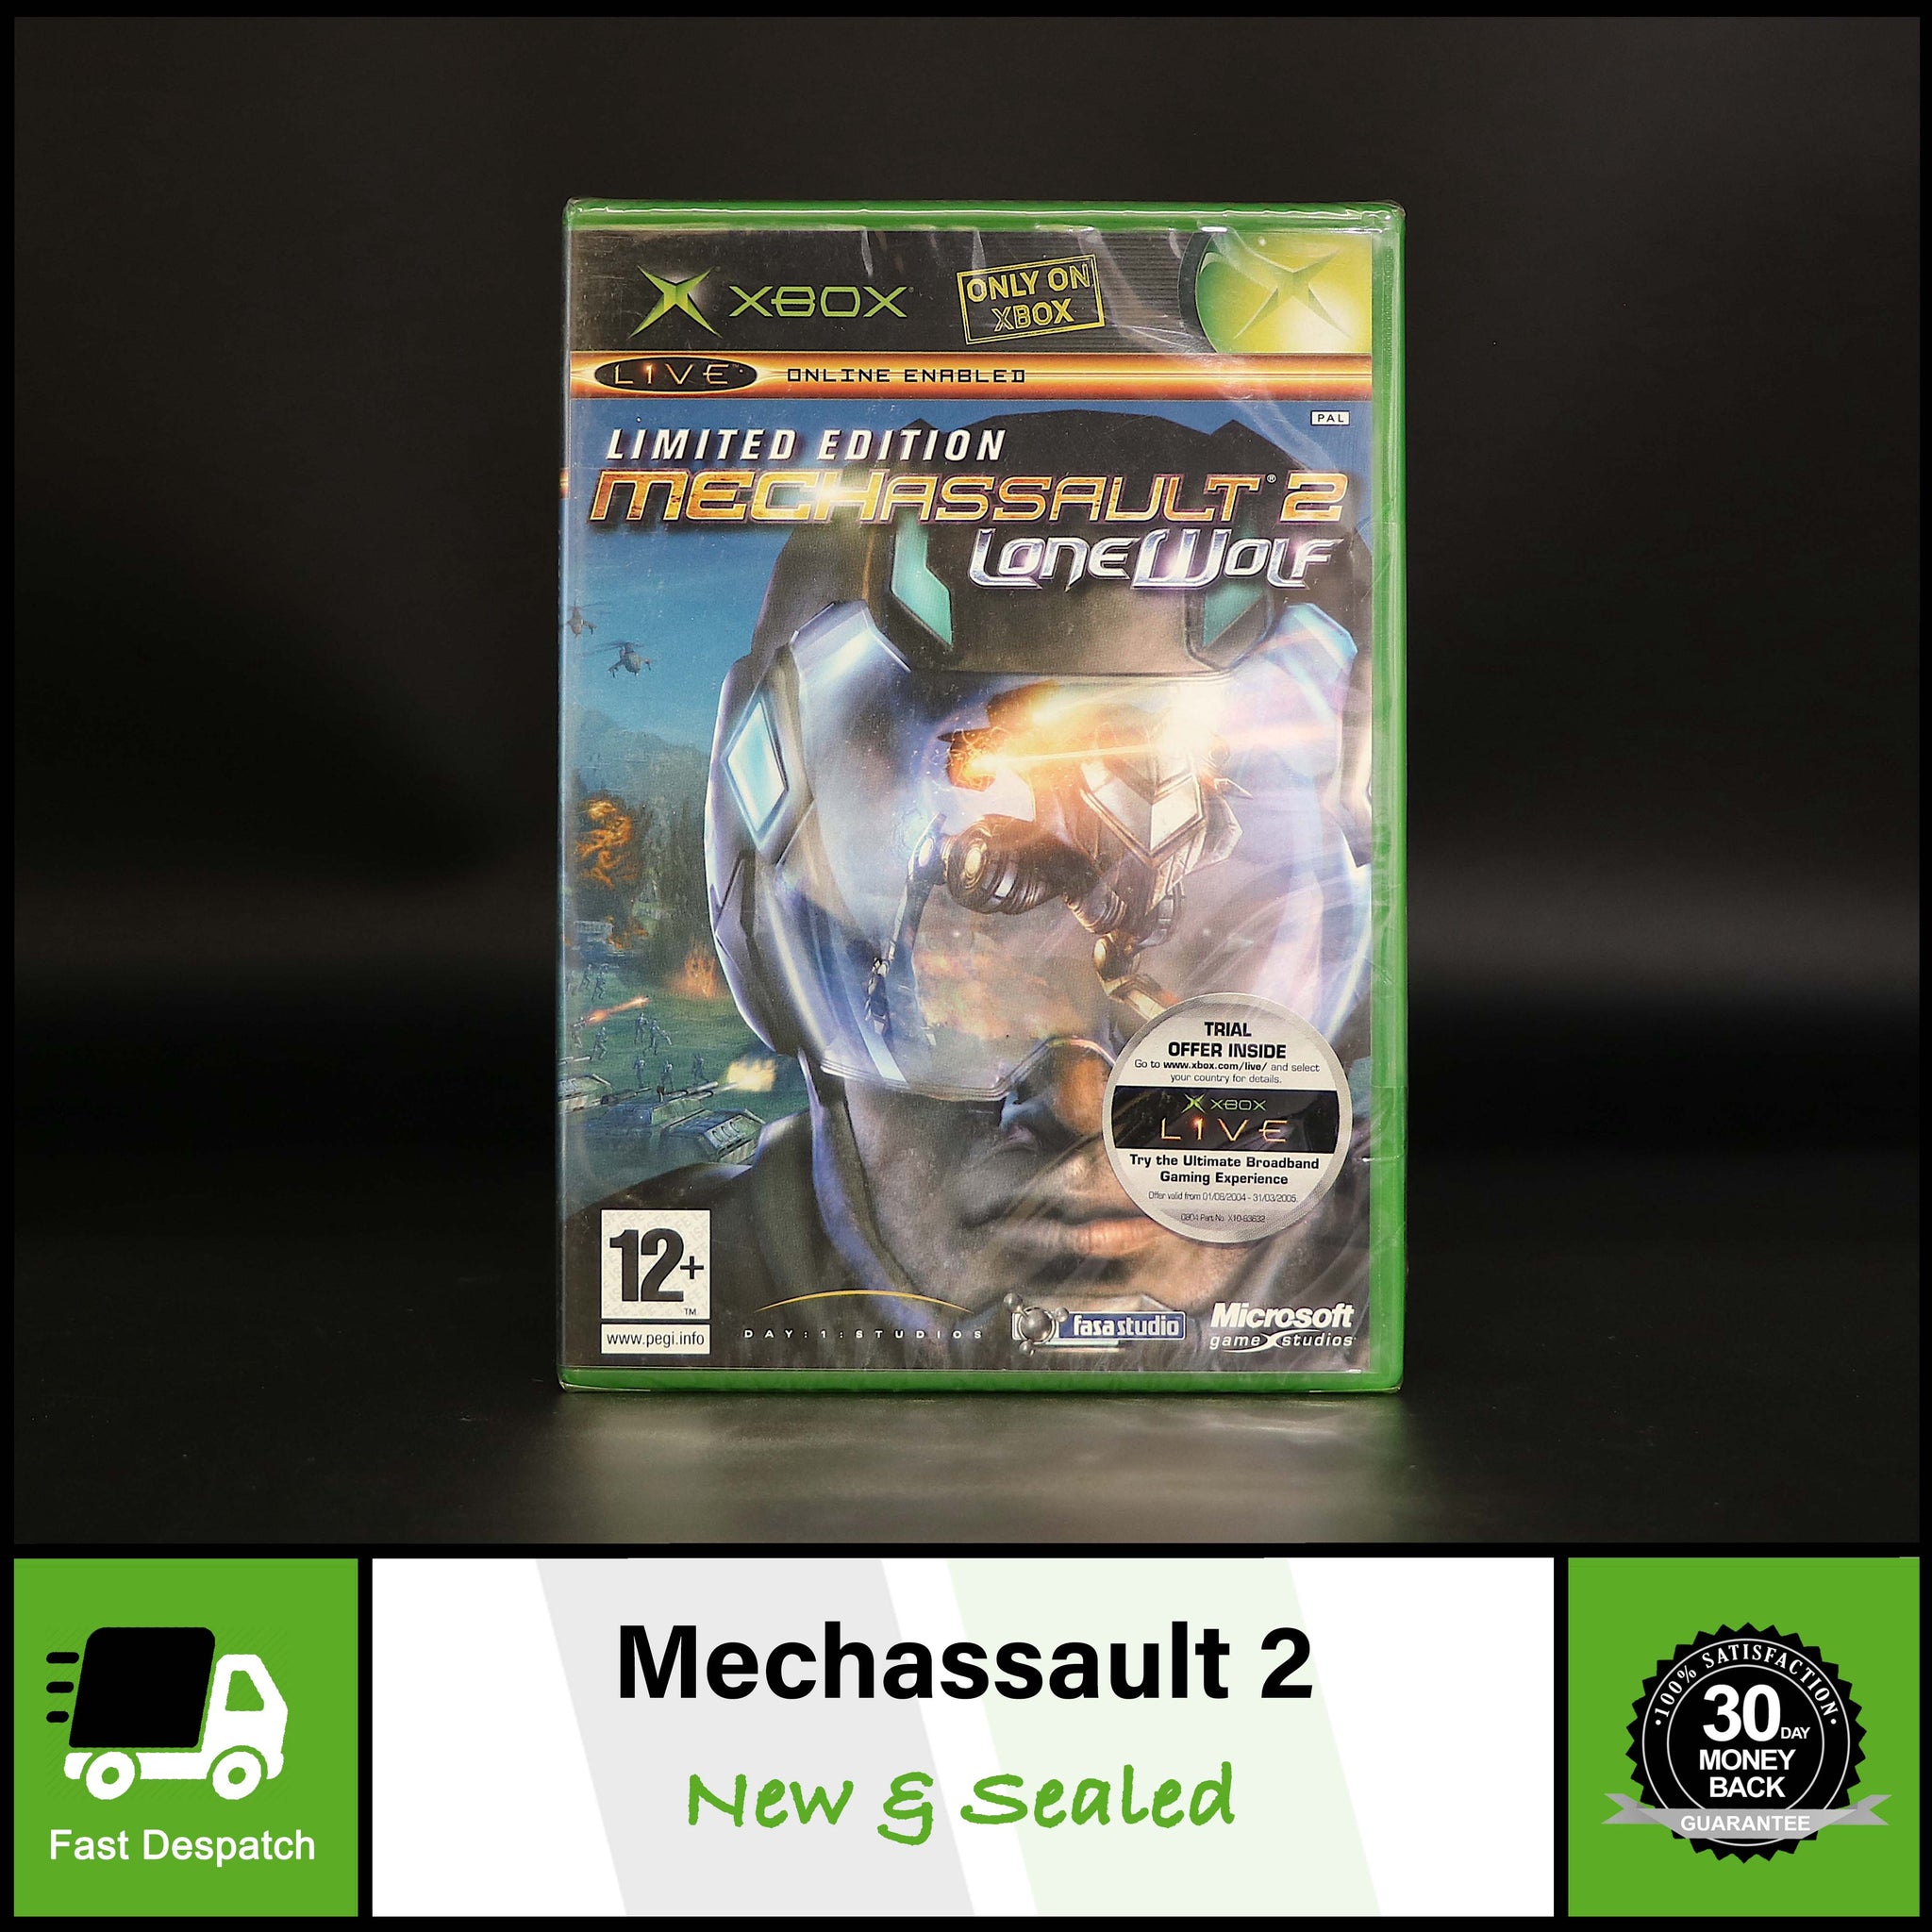 MechAssault 2 | Lone Wolf | Limited Edition | Original Xbox Game | New & Sealed